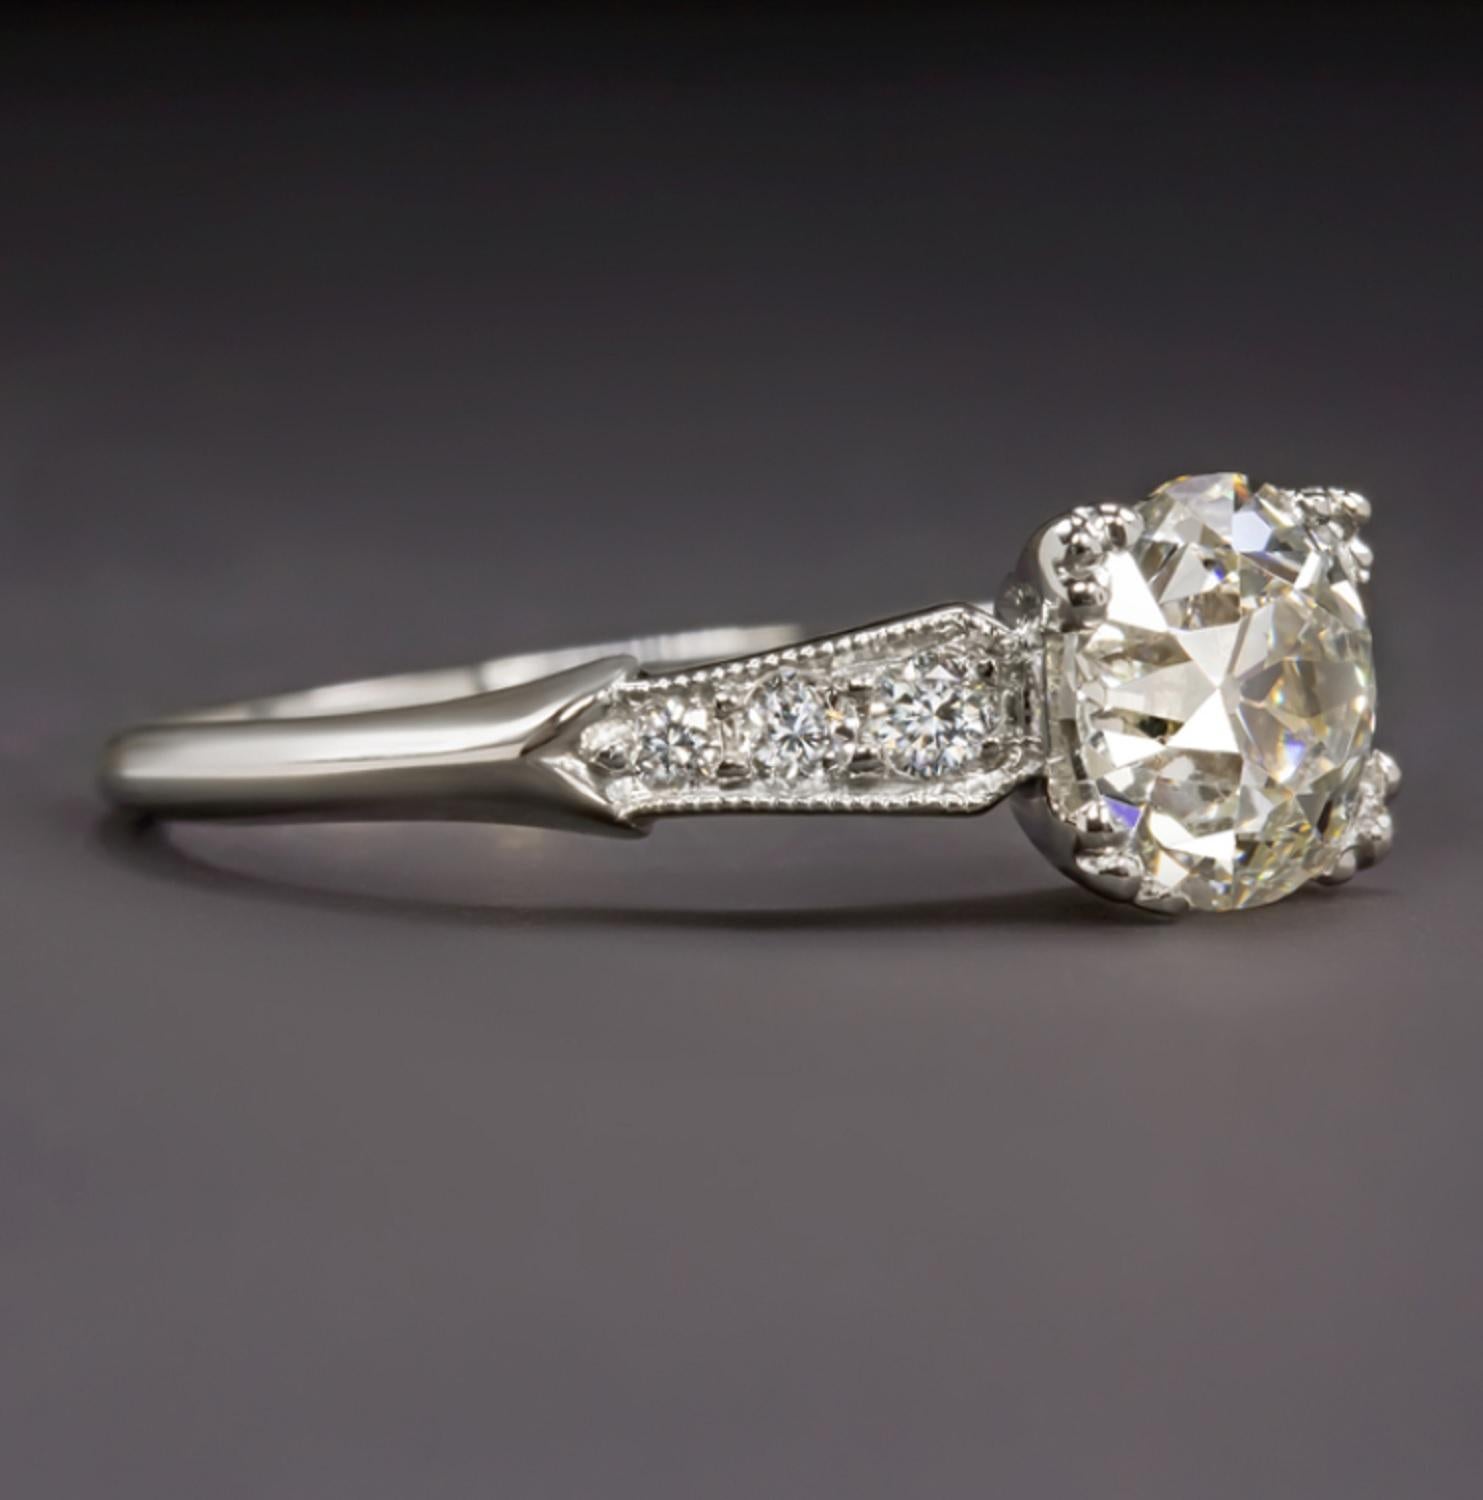 Elegant and full of brilliant sparkle, this vintage engagement ring’s classic design is crowned by a stunning 1.31ct old European cut certified diamond. The high quality diamond is beautifully white and exceptionally clean with H color and VS2